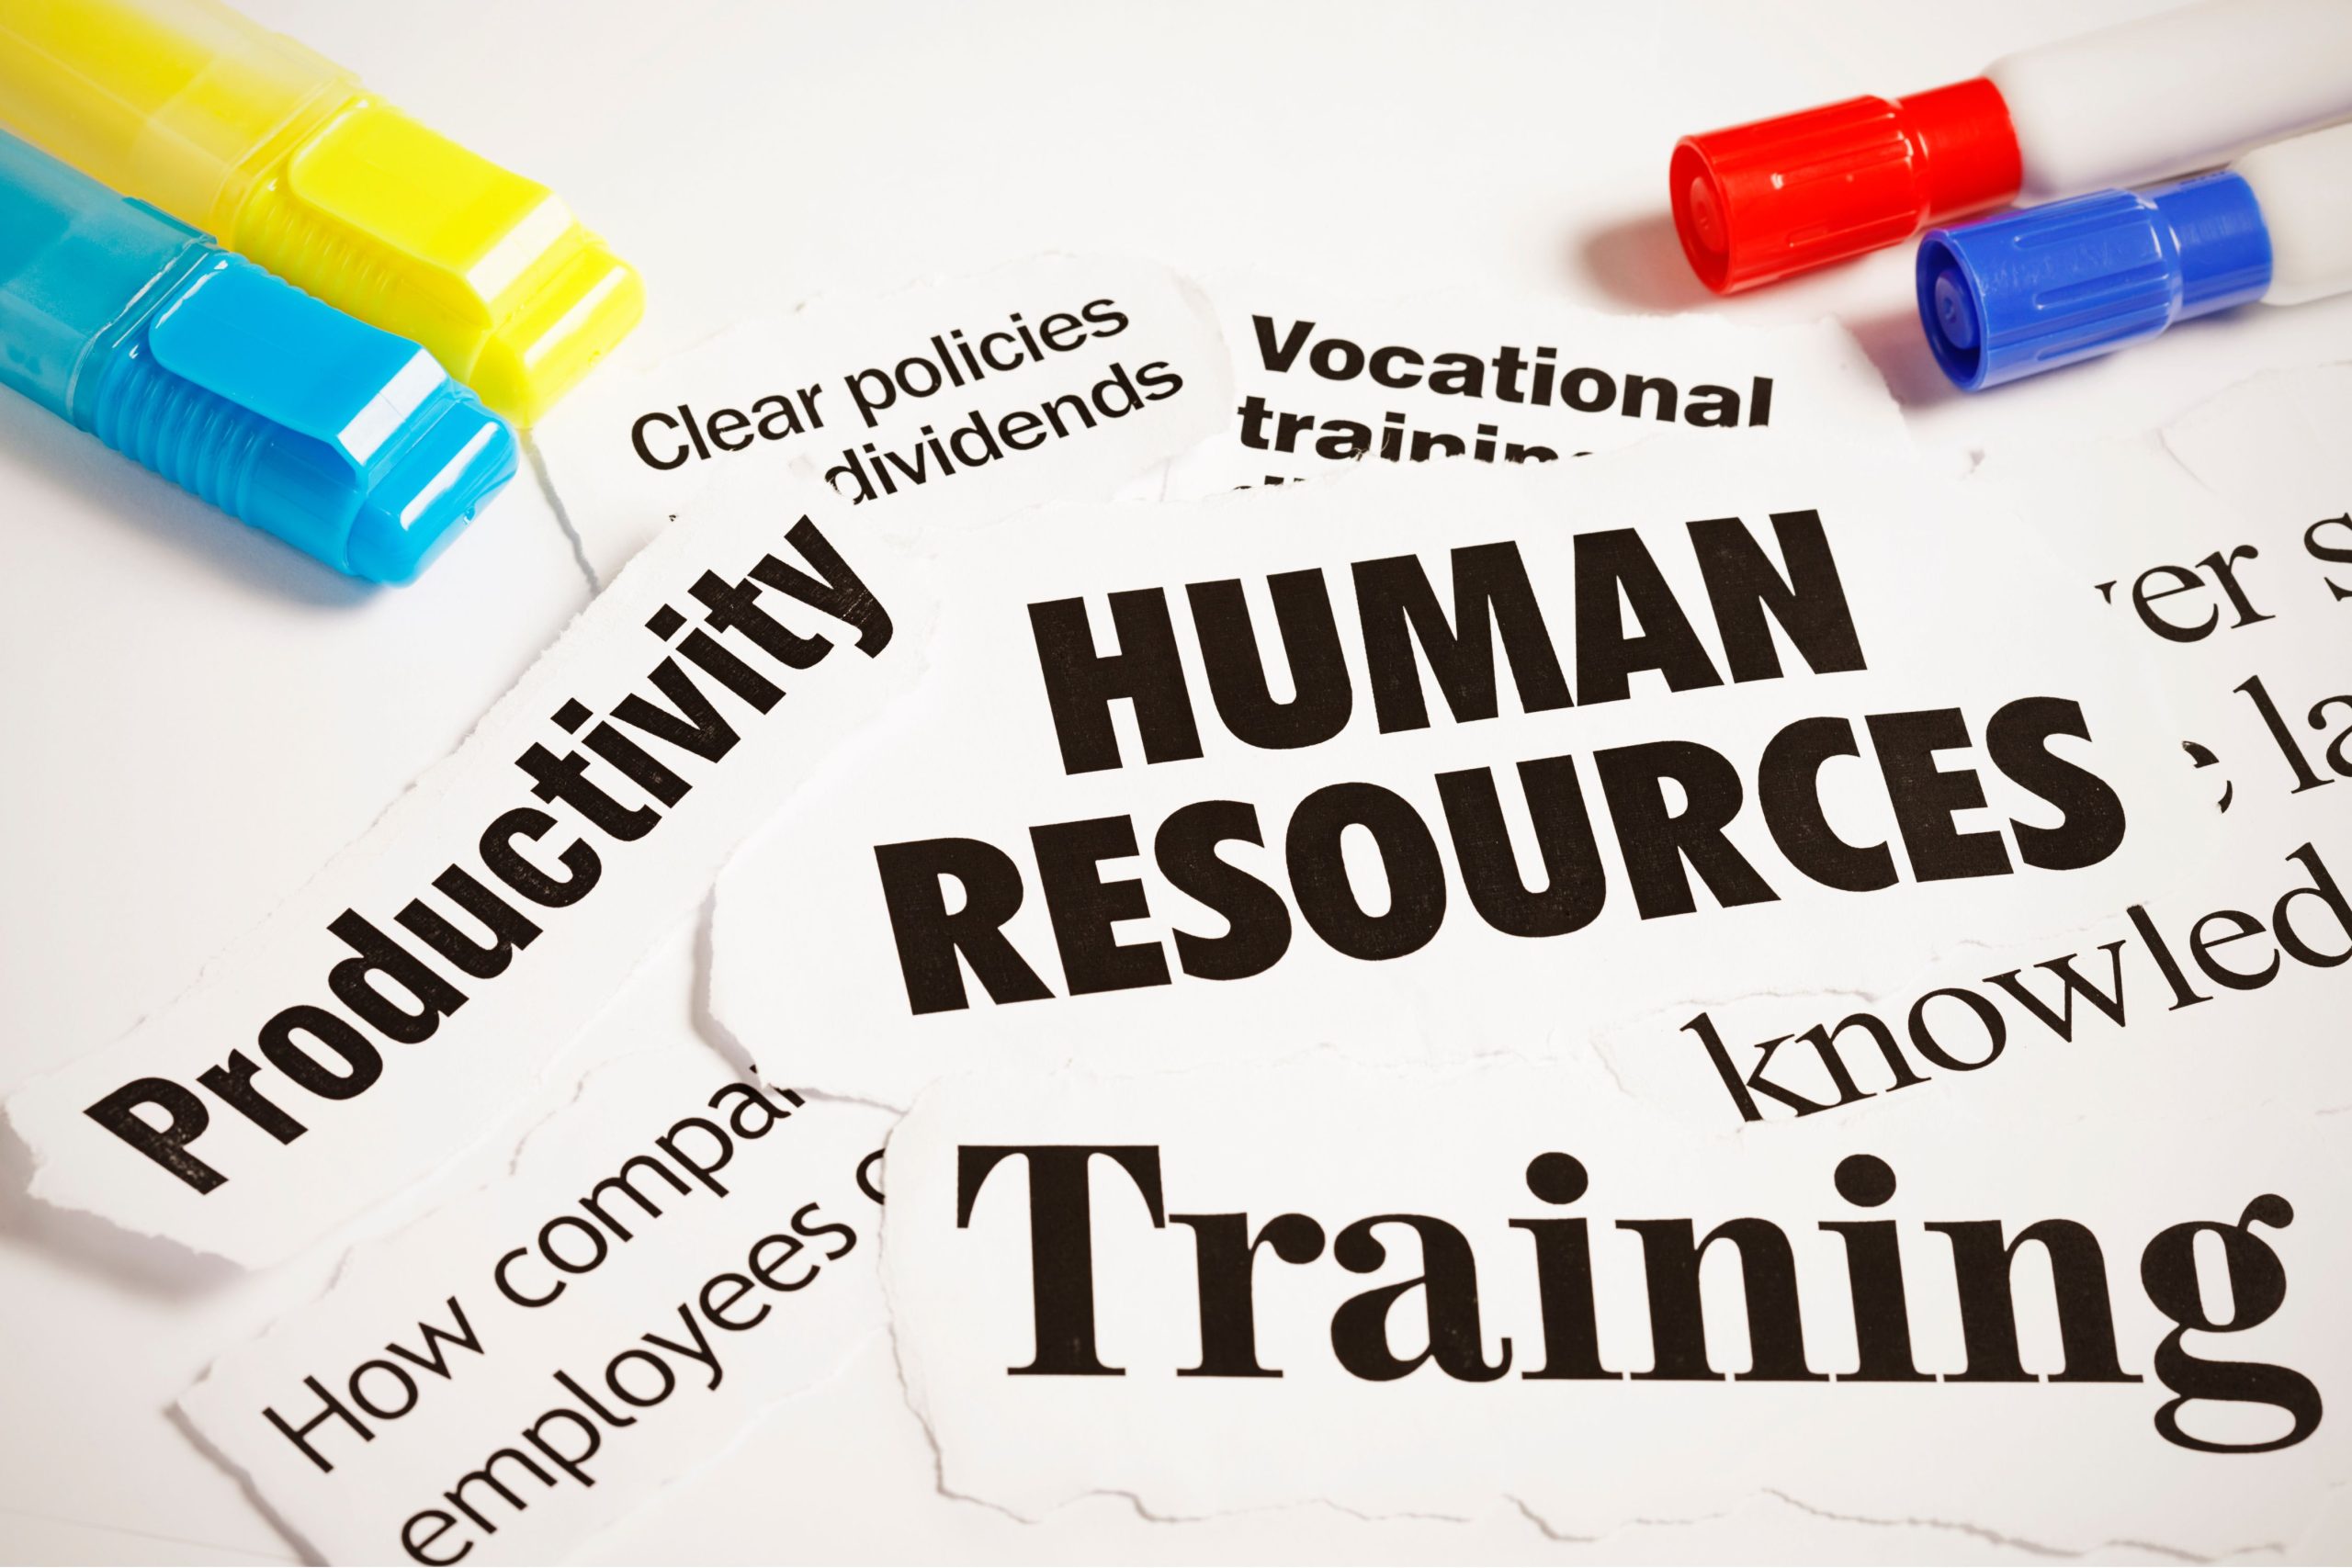 Human-Resources-(HR)-Definition-and-Key-Responsibilities-Stock-Markets